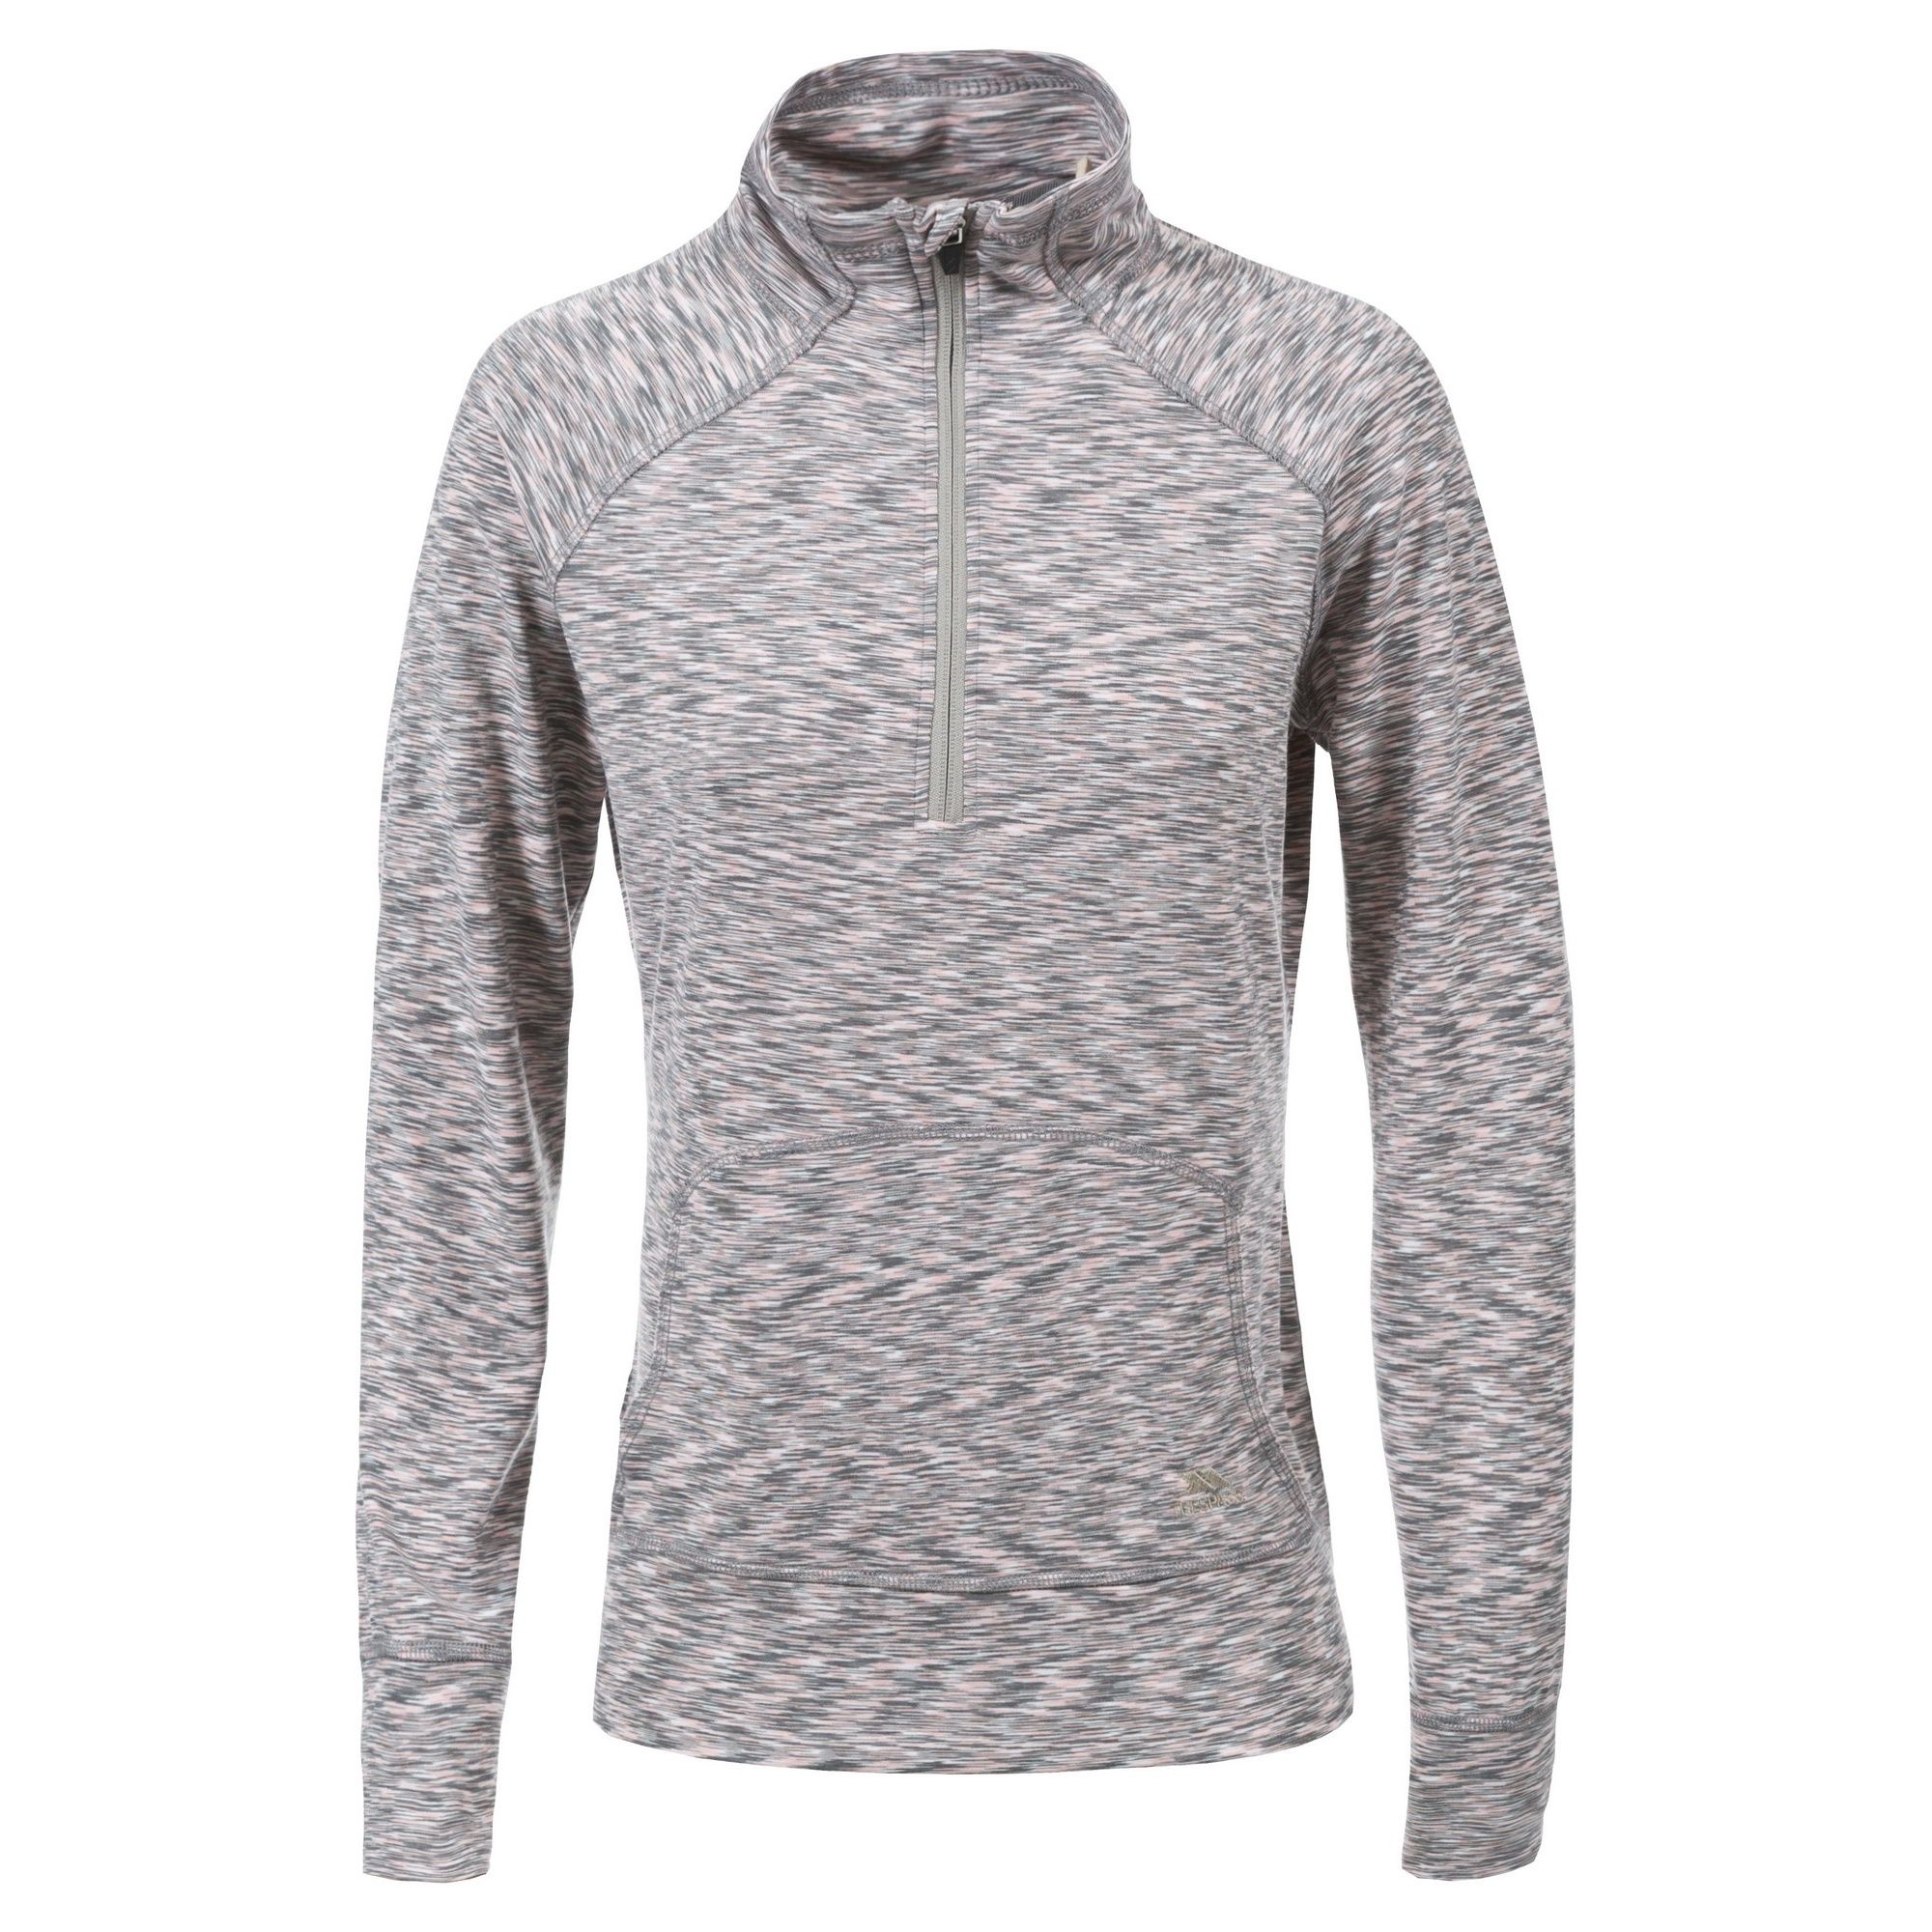 1/2 zip neck. Long sleeve. Front pouch pocket. Coverstitch detail. Quick dry. 95% Polyester, 5% Elastane. Trespass Womens Chest Sizing (approx): XS/8 - 32in/81cm, S/10 - 34in/86cm, M/12 - 36in/91.4cm, L/14 - 38in/96.5cm, XL/16 - 40in/101.5cm, XXL/18 - 42in/106.5cm.